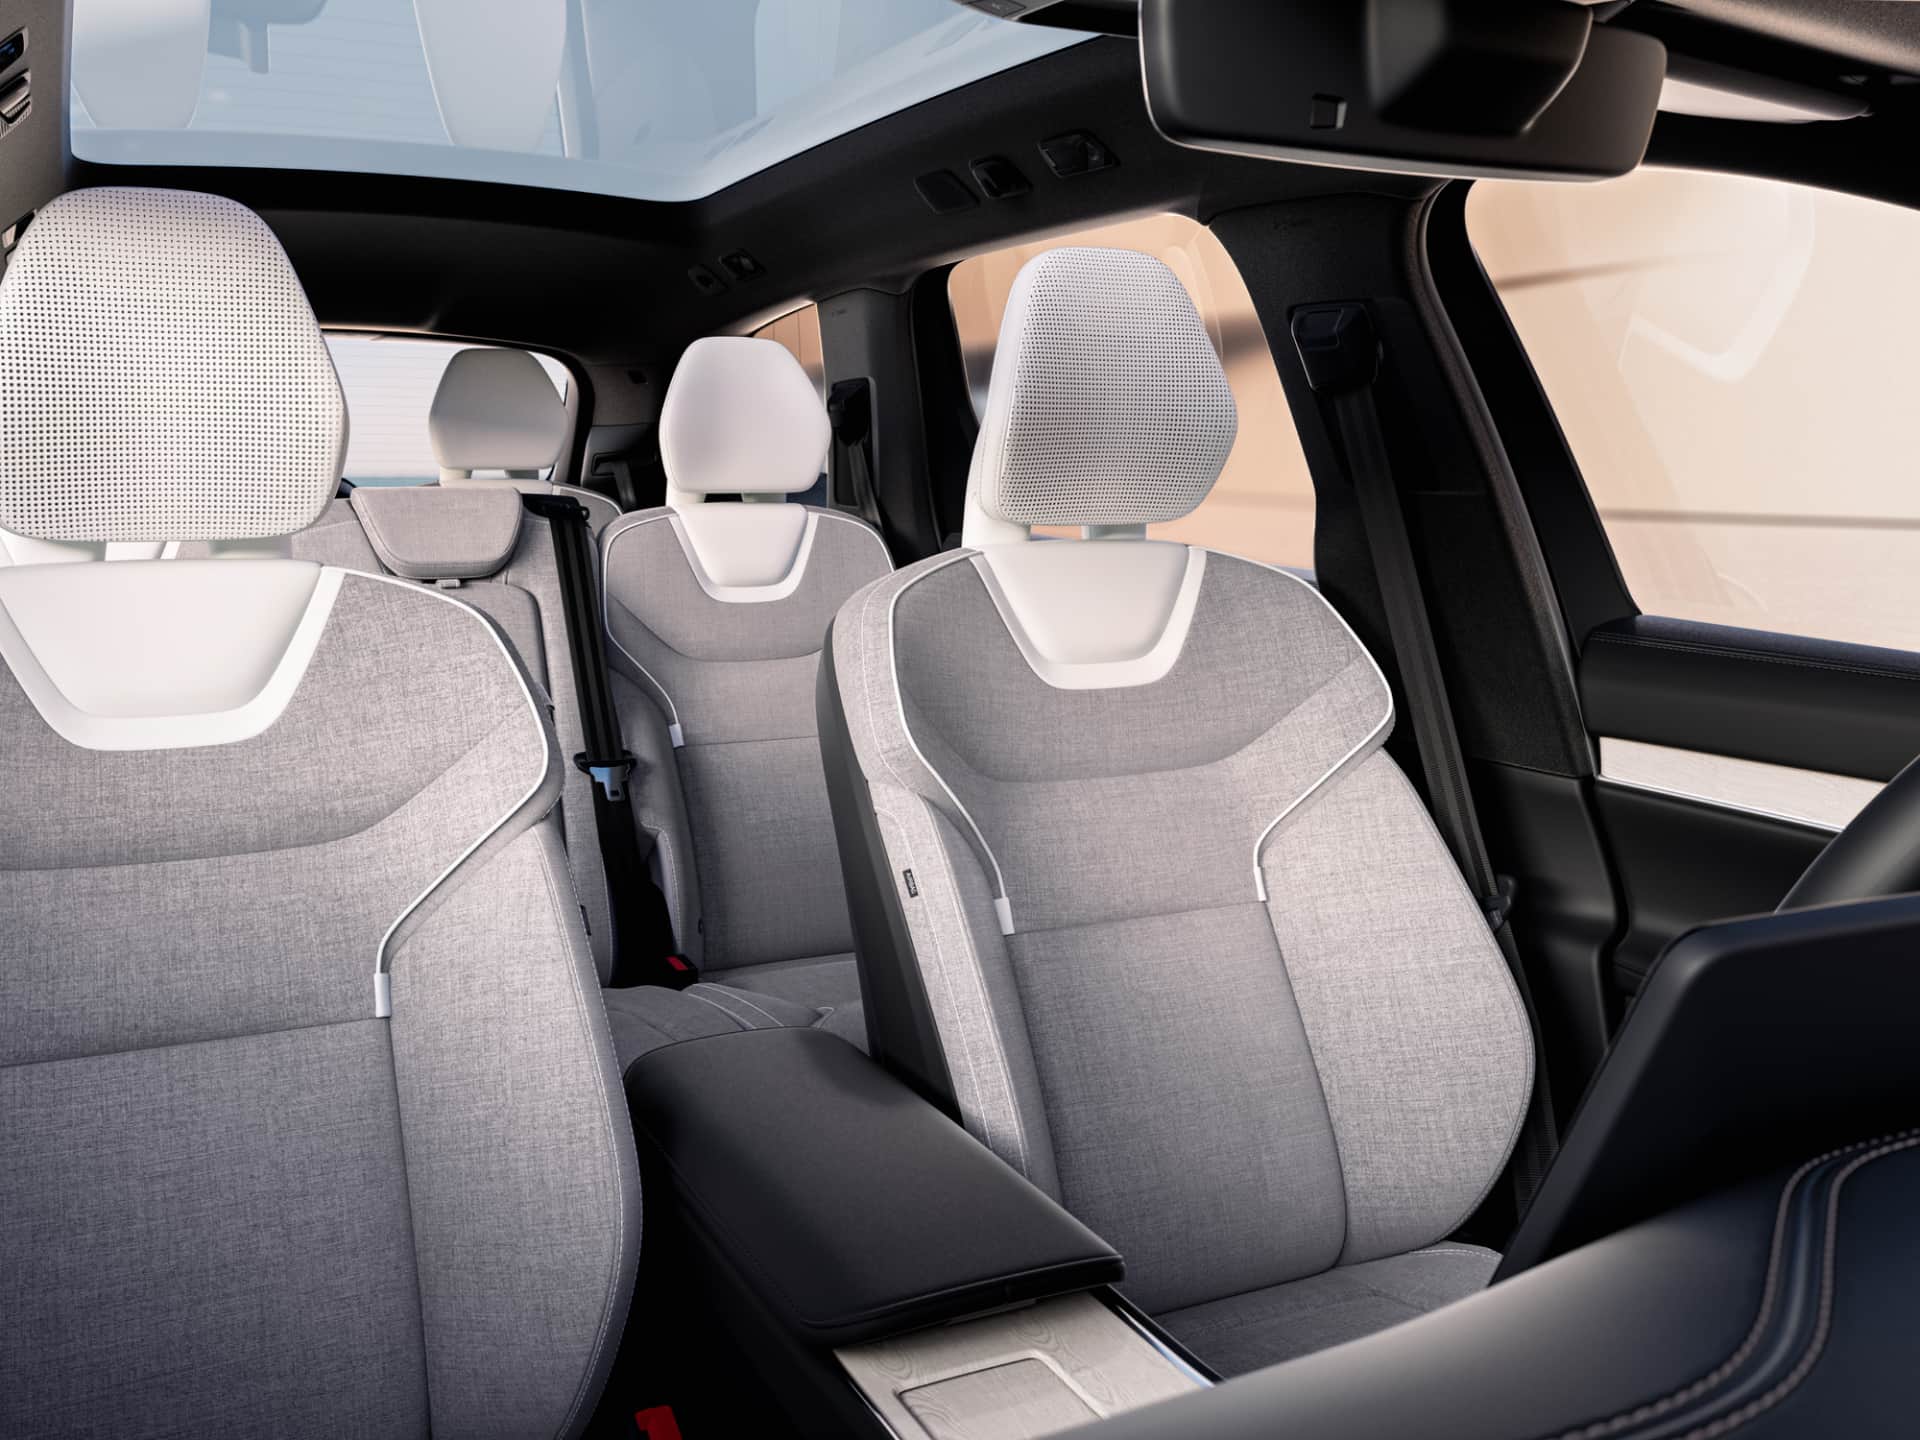 An image showing the car seats from the inside of a Volvo EX90.